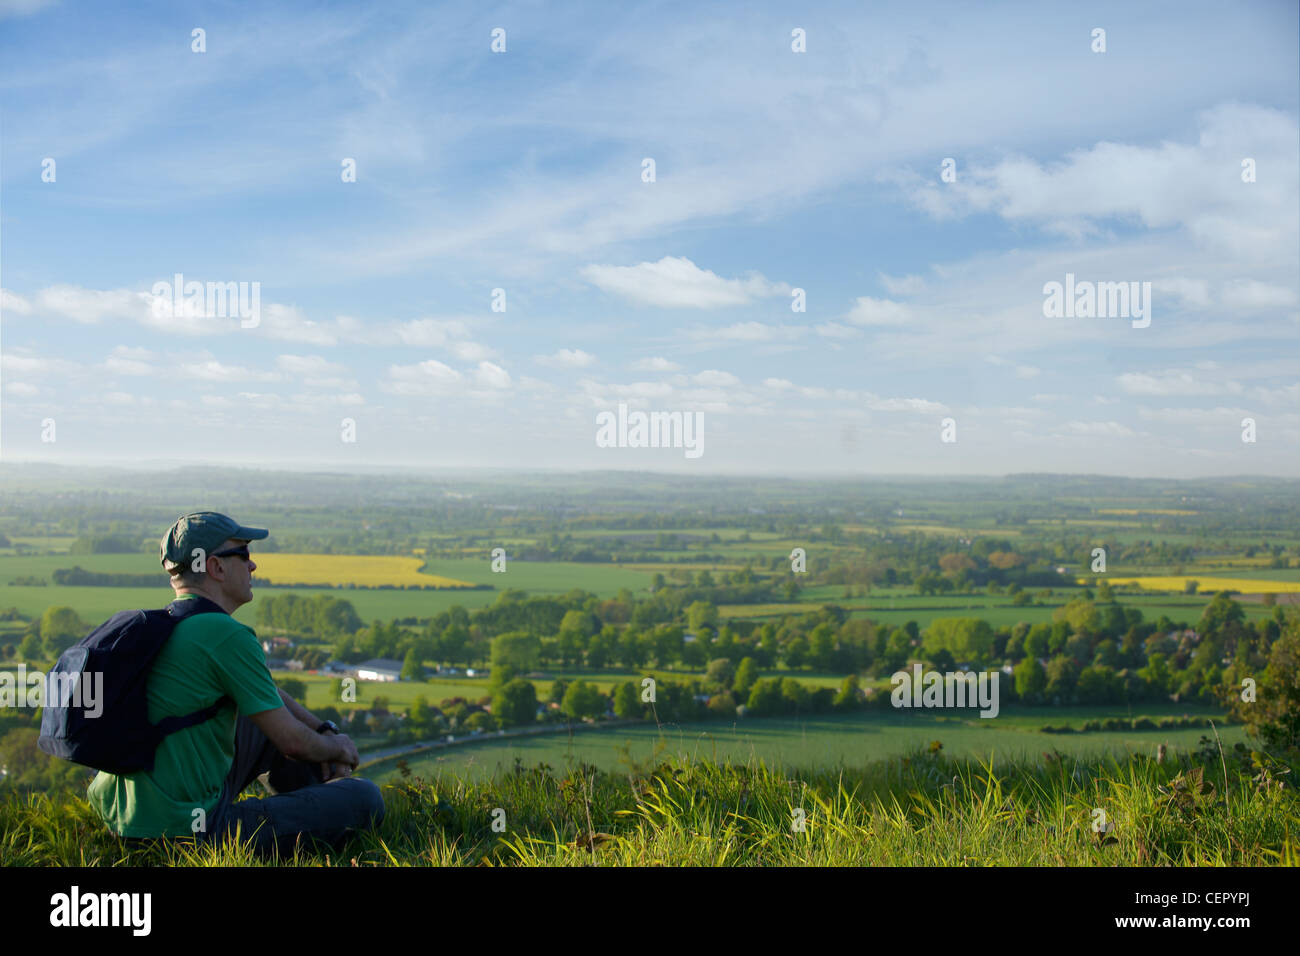 A man carrying a rucksack on his back sitting on a hill looking out over the landscape below. Stock Photo